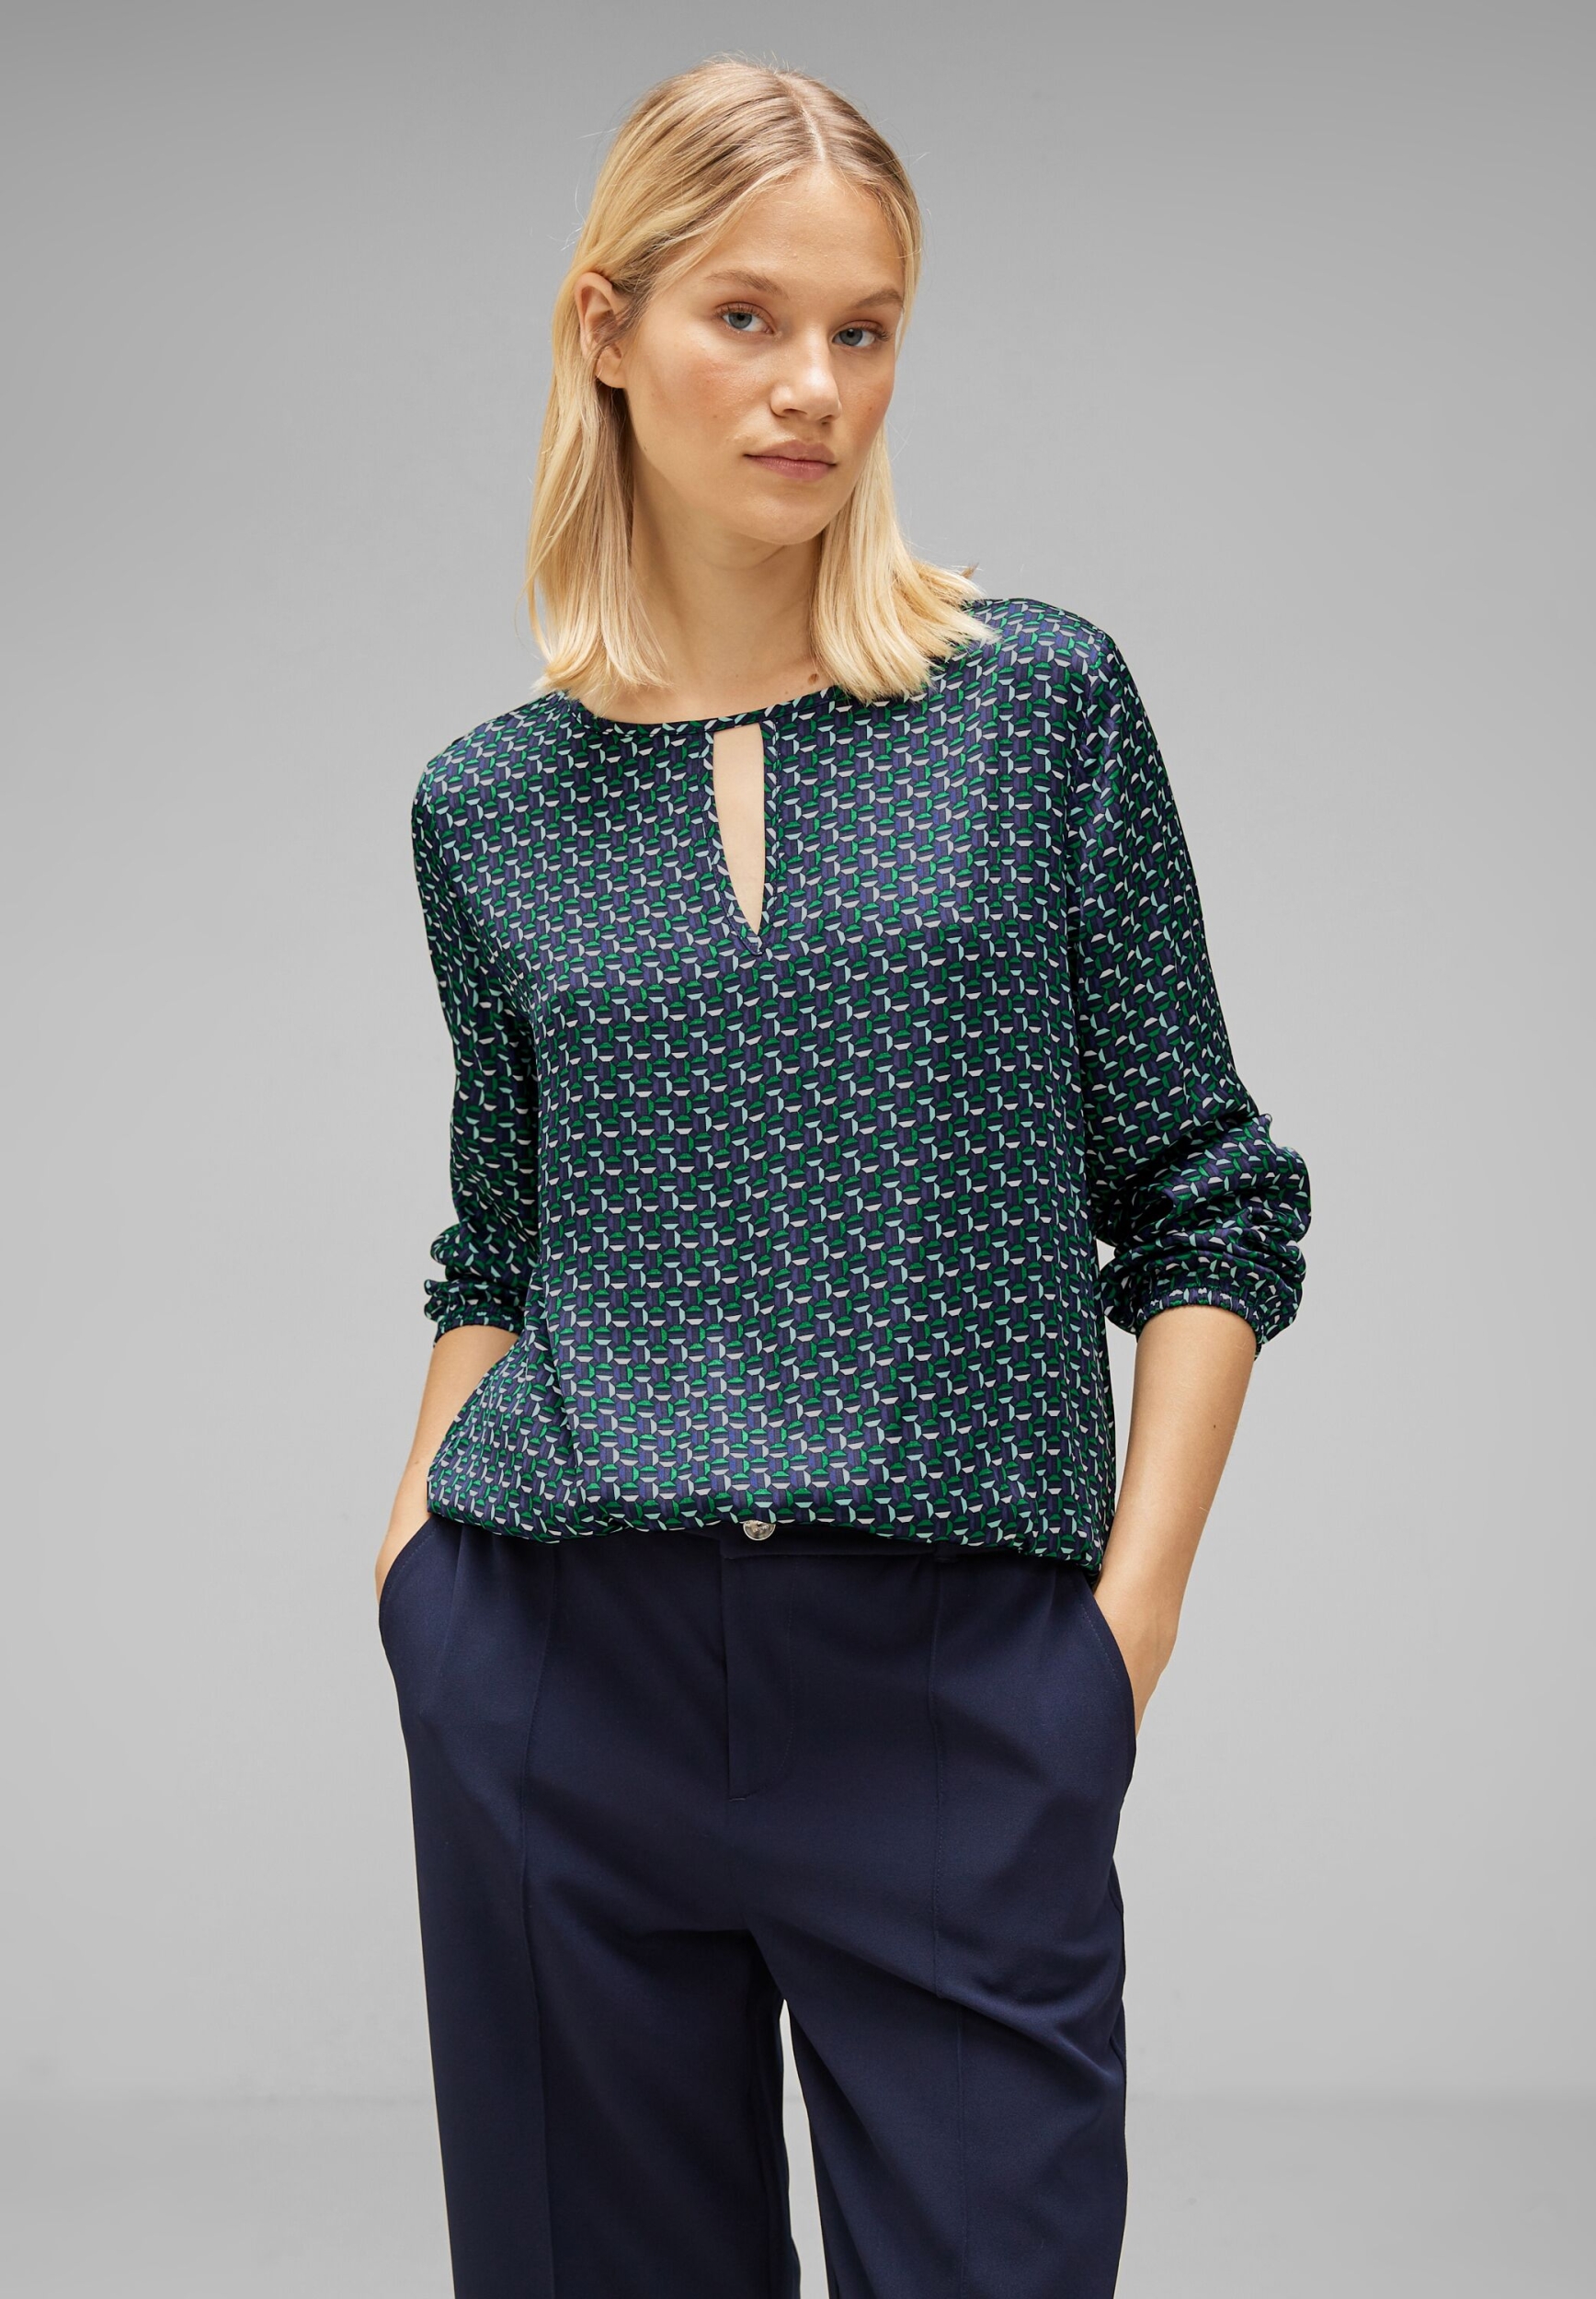 40 gentle | green | cut | satinblouse Printed out w A344194-35245-40